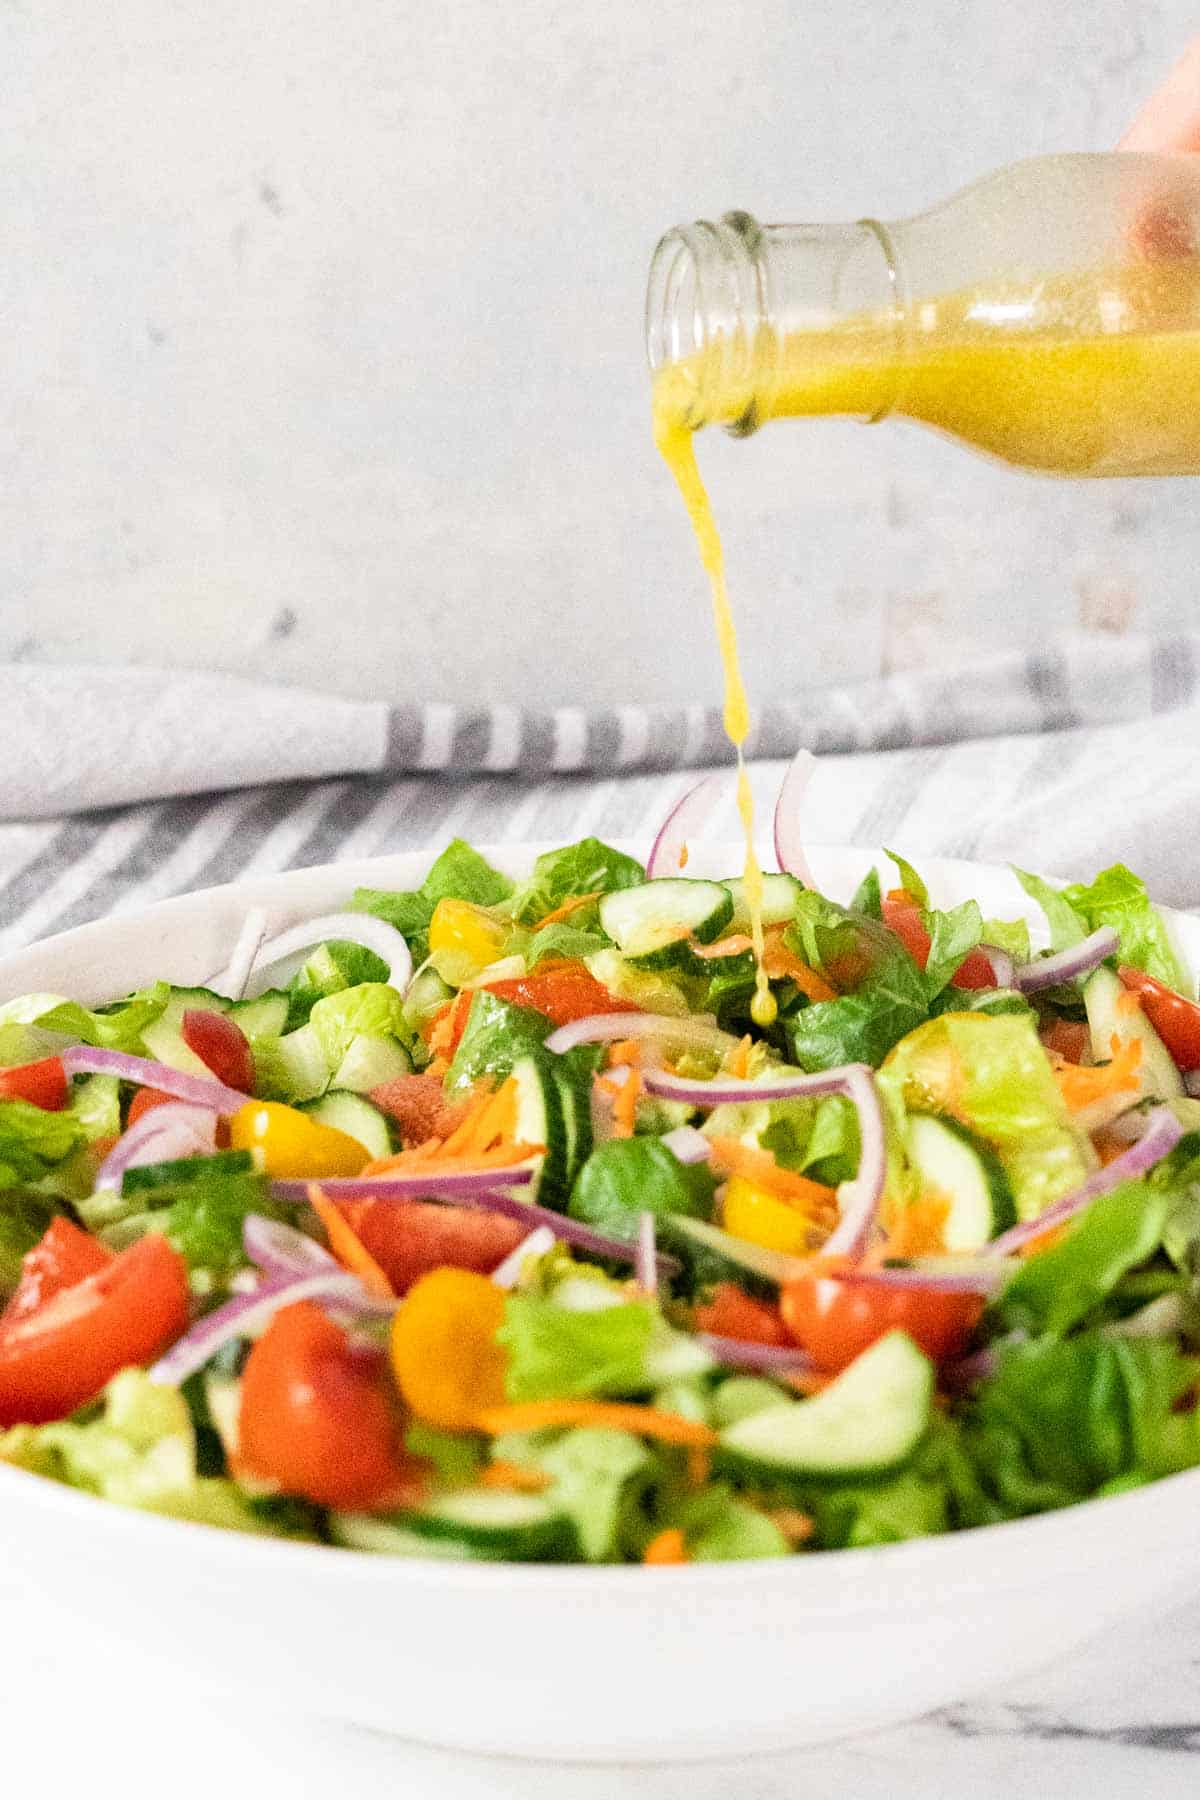 Pouring dressing on a salad.